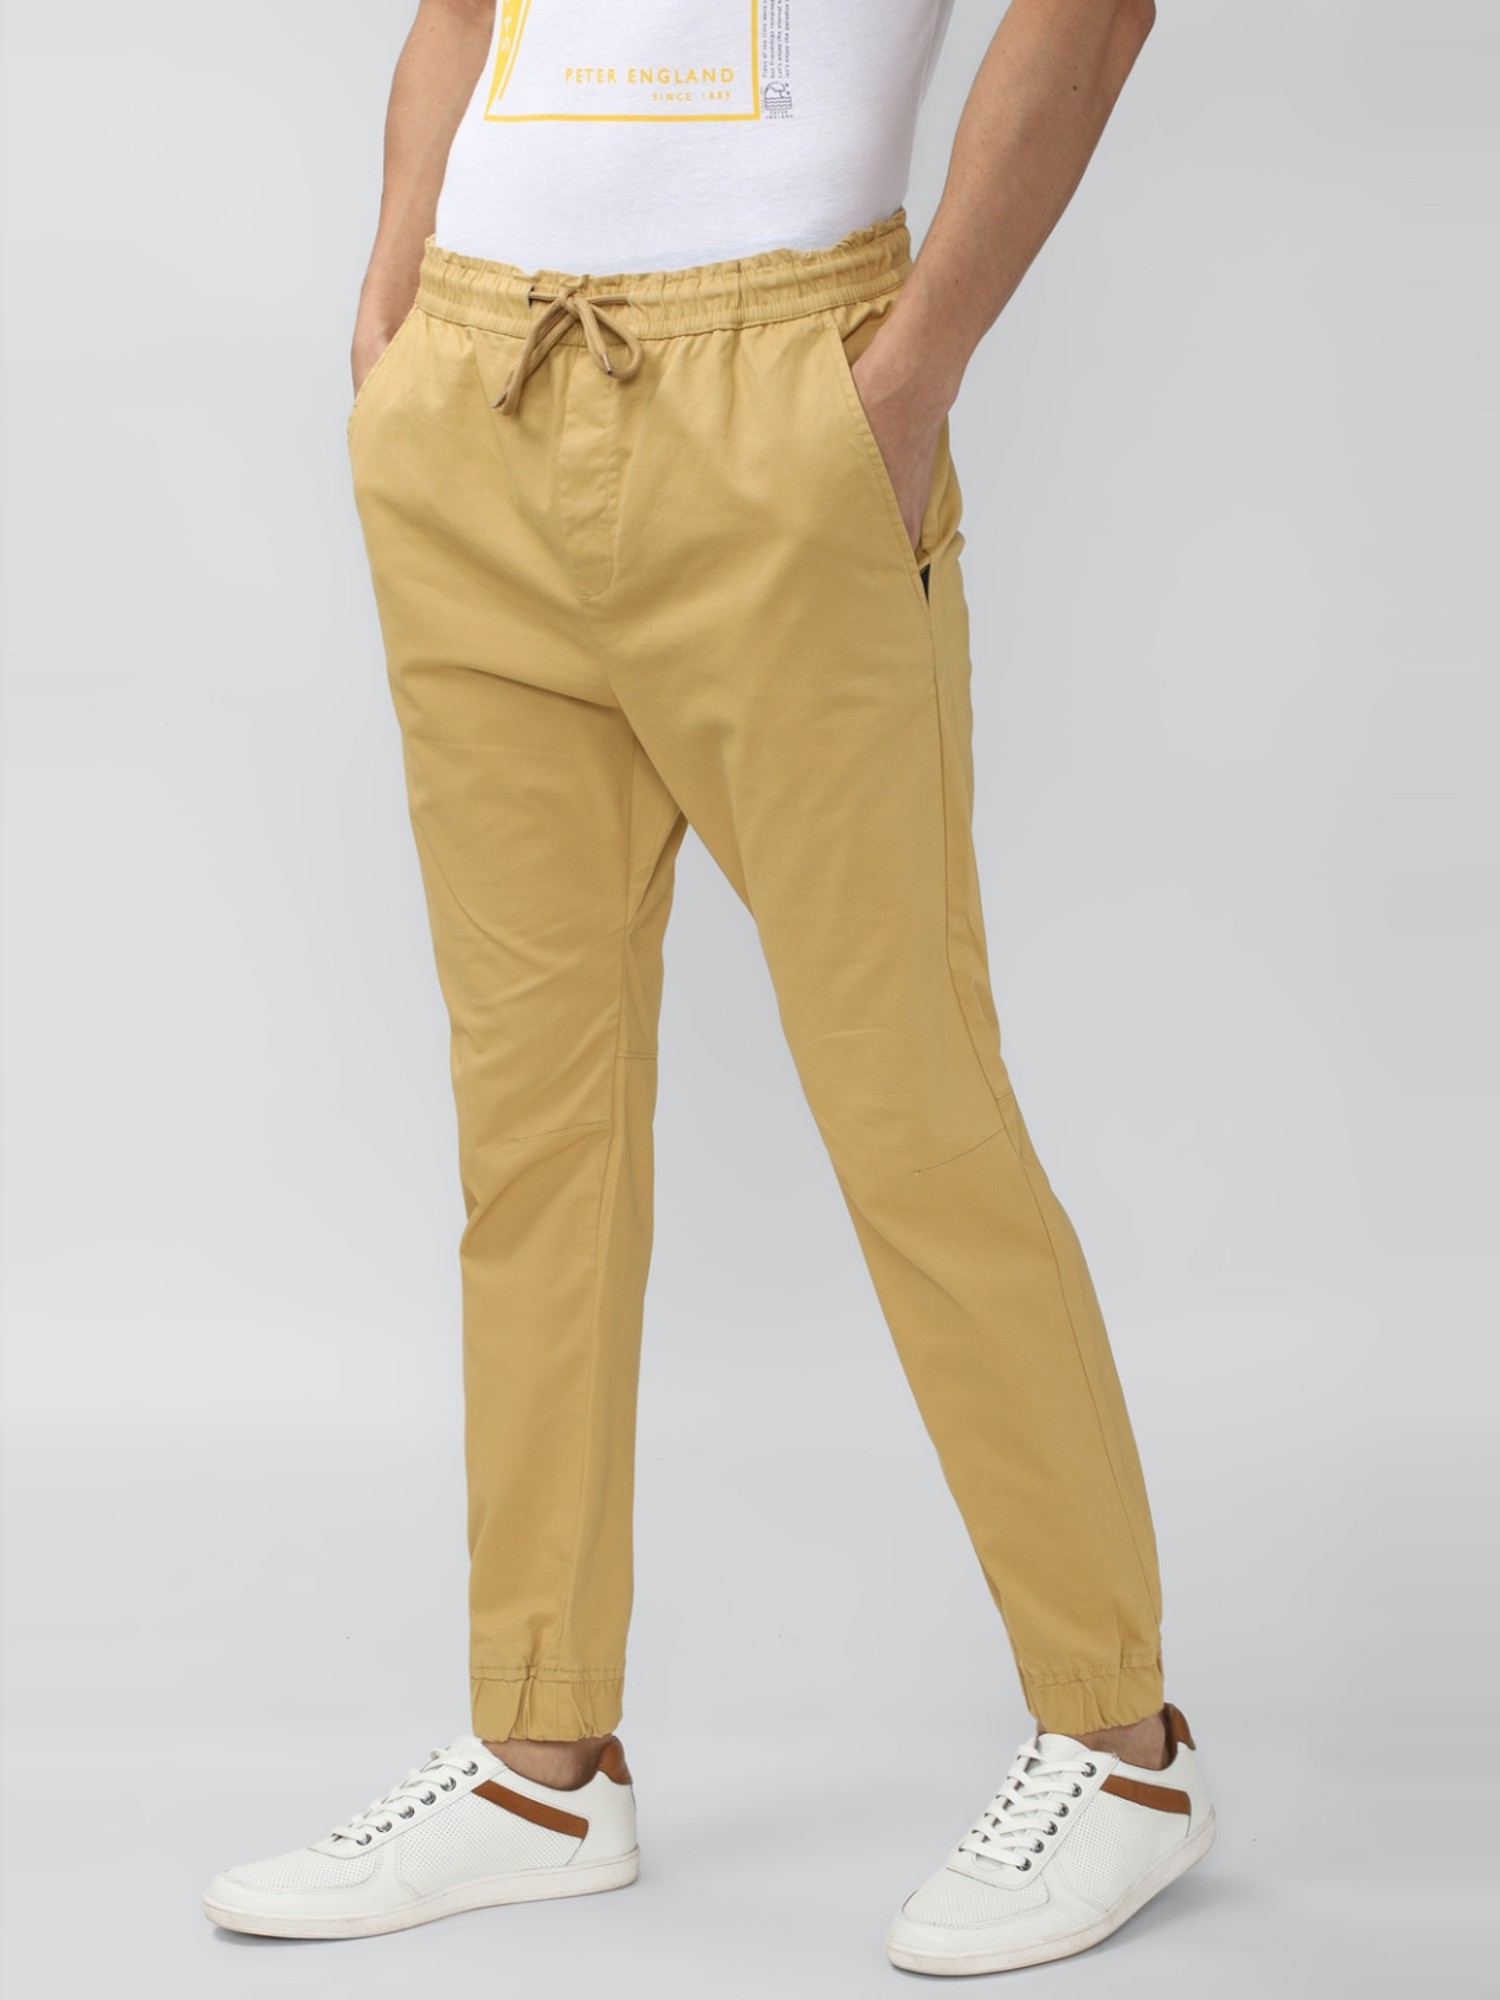 Khaki Flat Trousers Peter England Trousers at Rs 1599/piece in Bengaluru |  ID: 19094698355